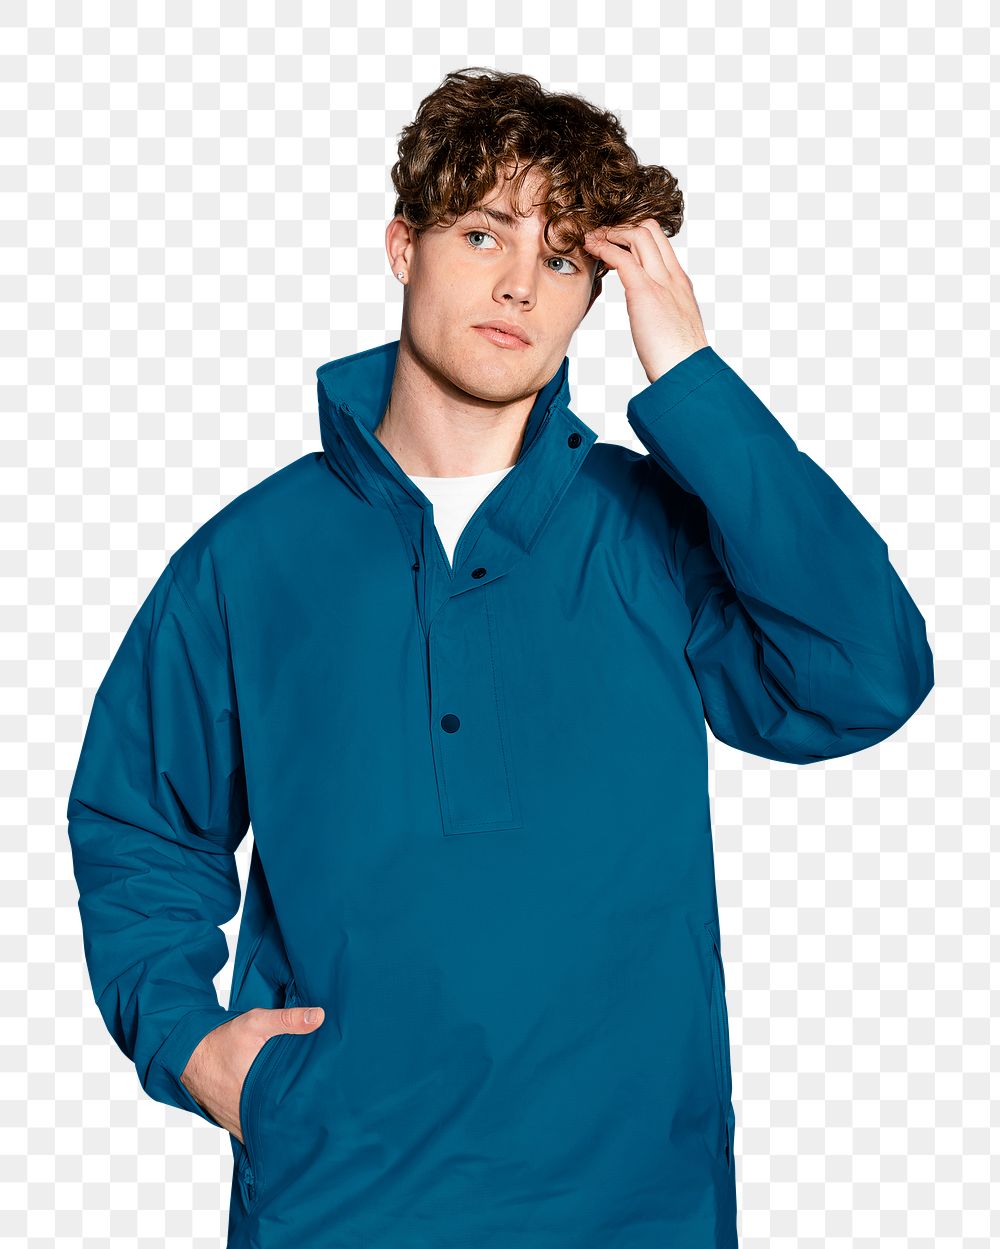 Handsome man png with curly hair, transparent background